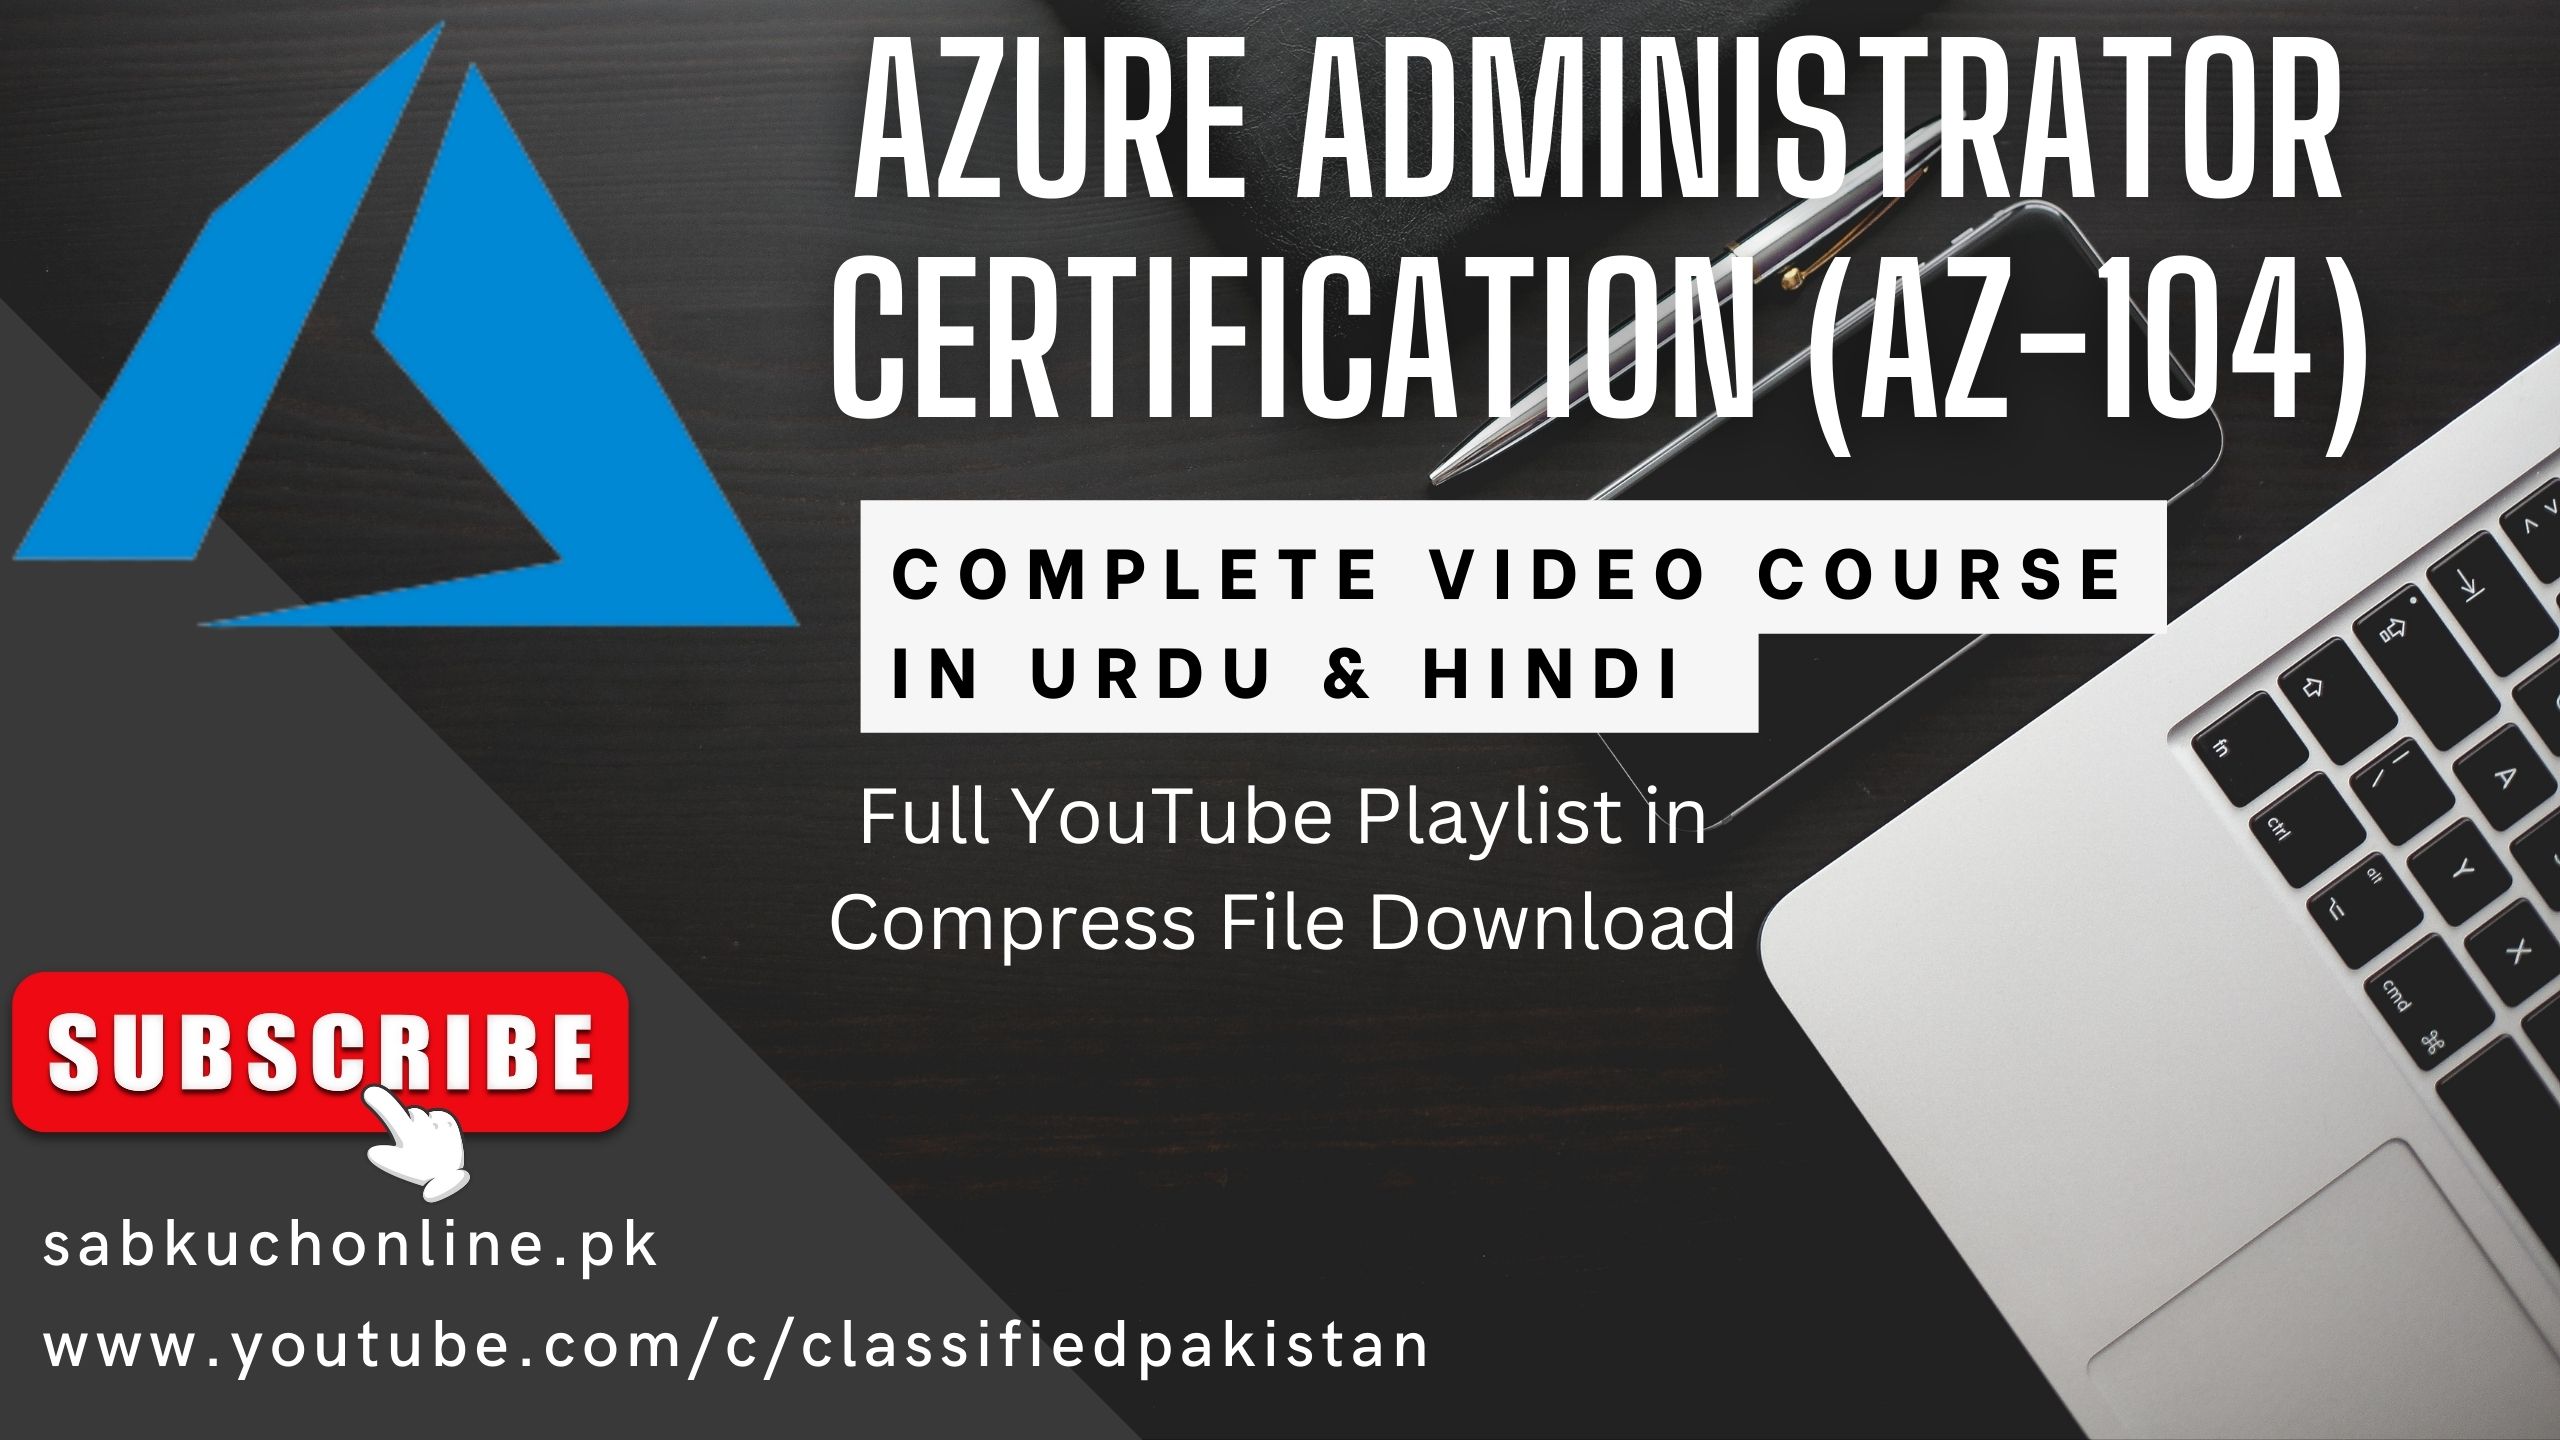 Azure Administrator Certification (AZ-104) Complete Video Course in Urdu & Hindi Full YouTube Playlist in Compress File Download